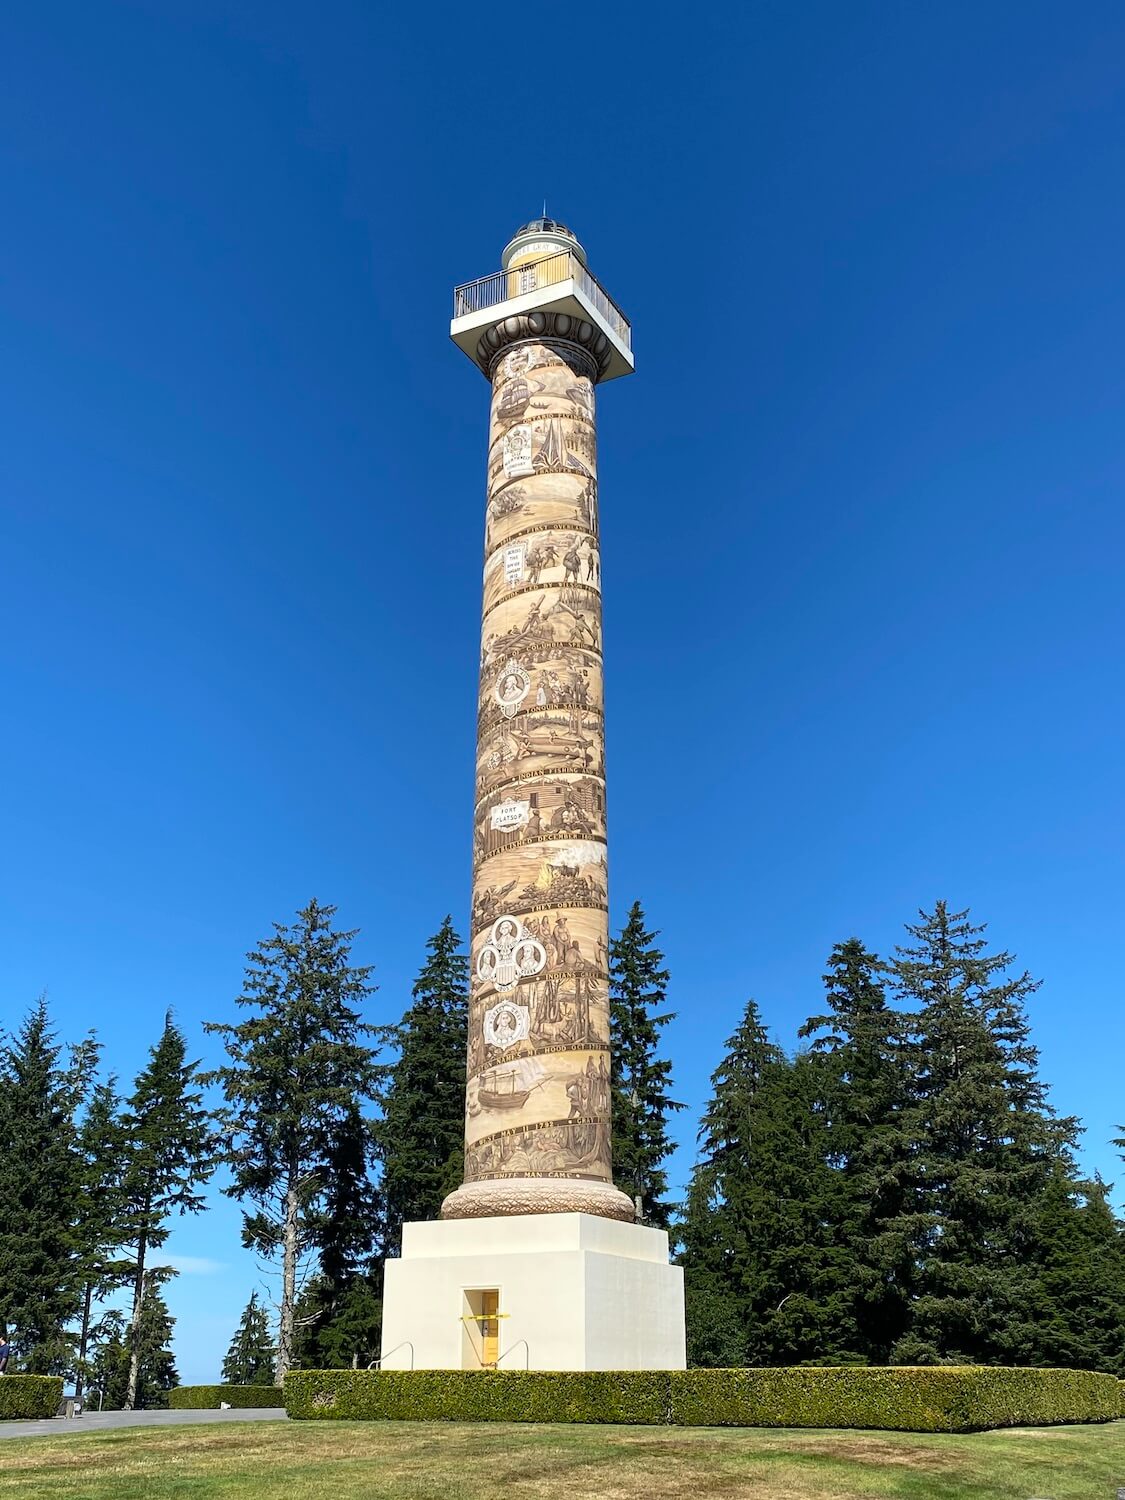 One of the most memorable things to do in Astoria Oregon is climb the many steps to the top of the Astoria Column, overlooking water on three sides.  The column rises up from a granite base with murals etched into the side depicting the early history of this city. 